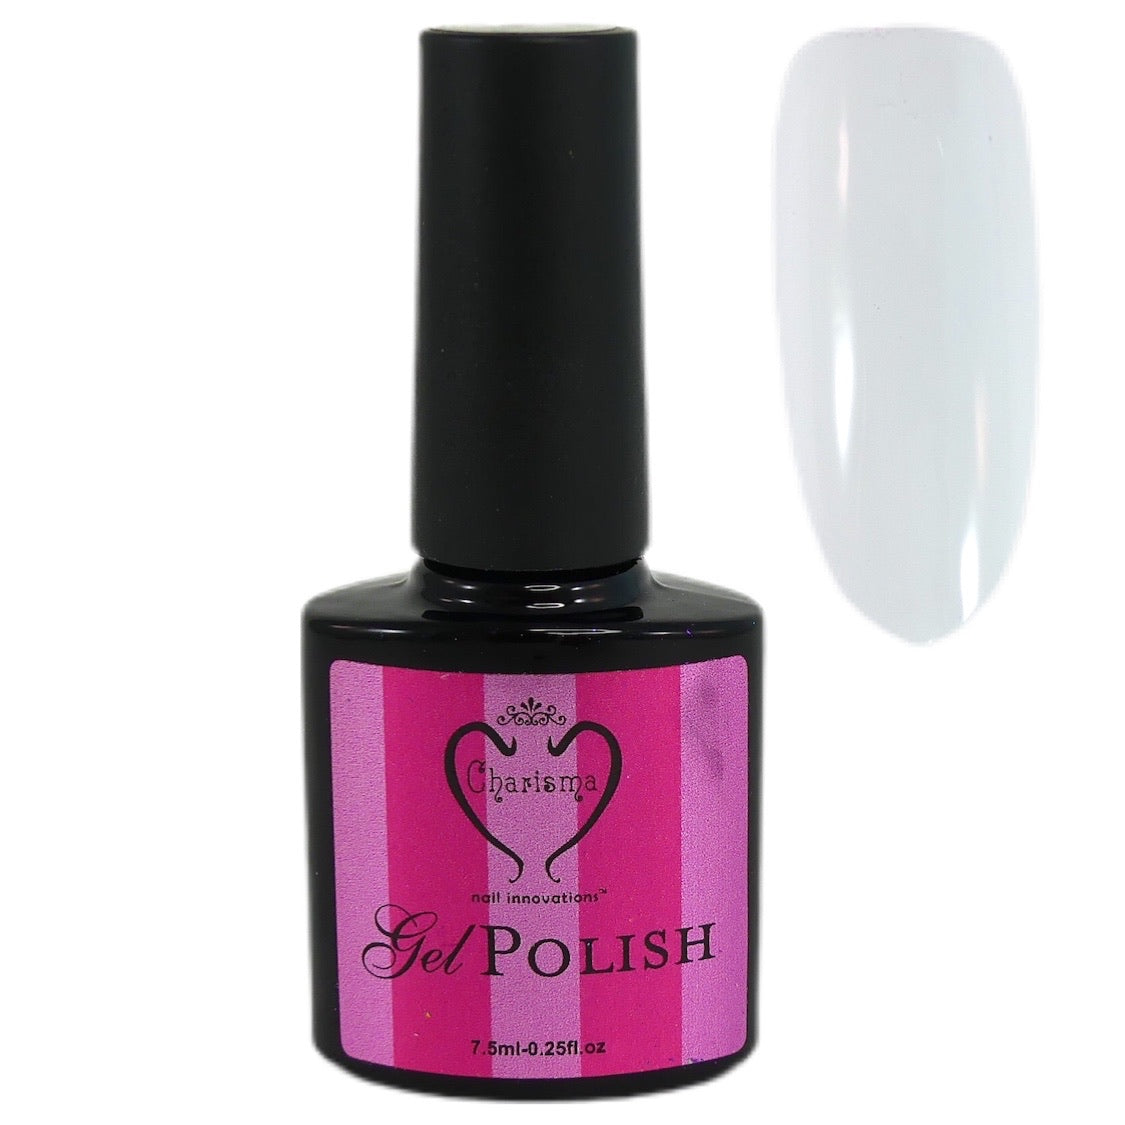 Load image into Gallery viewer, Charisma Gel Polish - Super White - My Little Nail Art Shop
